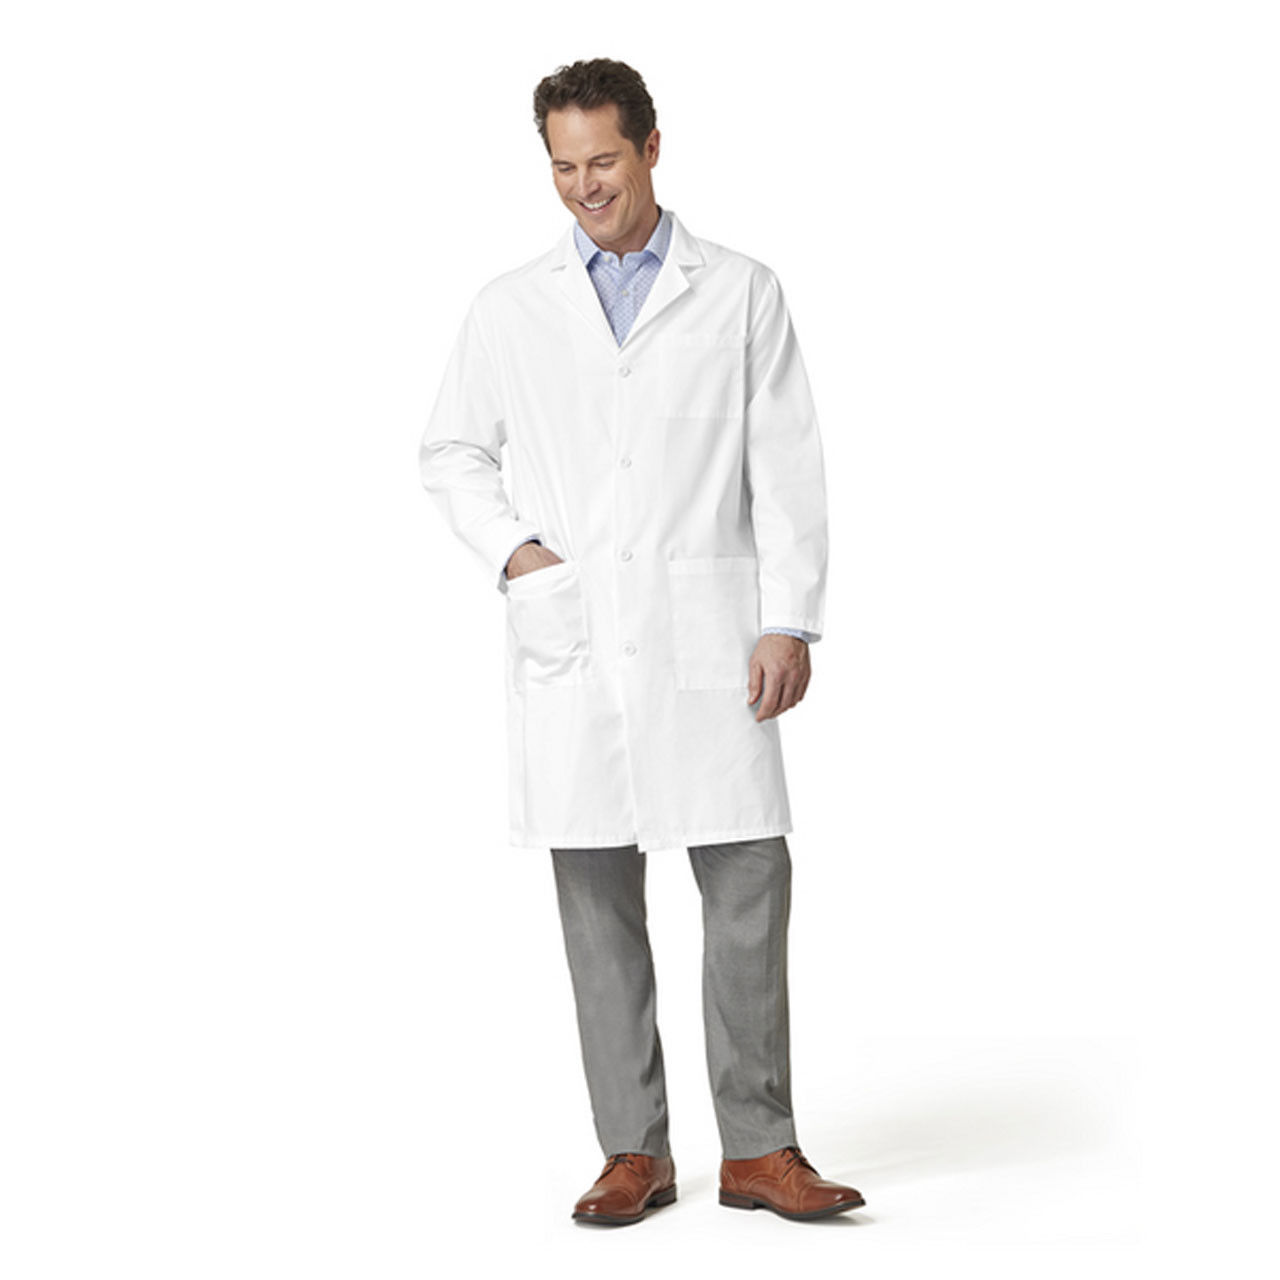 Is the Unisex Cotton Lab Coat by Fashion Seal suitable for all medical pros?